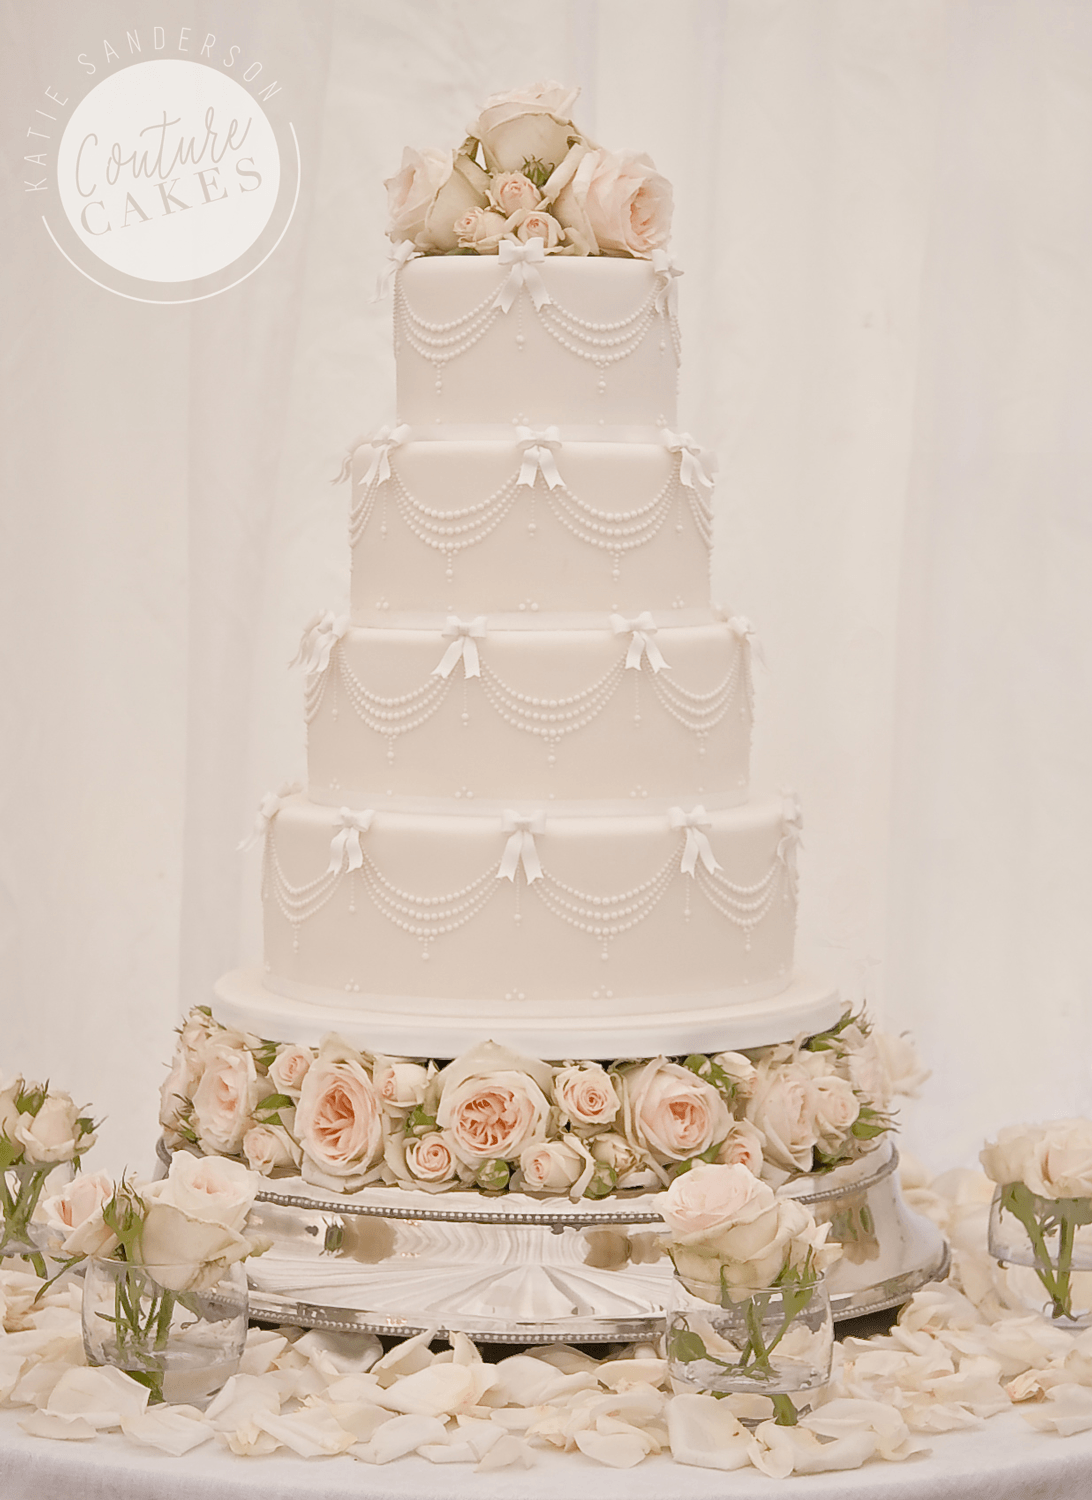 Pearl Drapes Wedding Cake: Serves 180 portions, Price category C £795 plus flowers